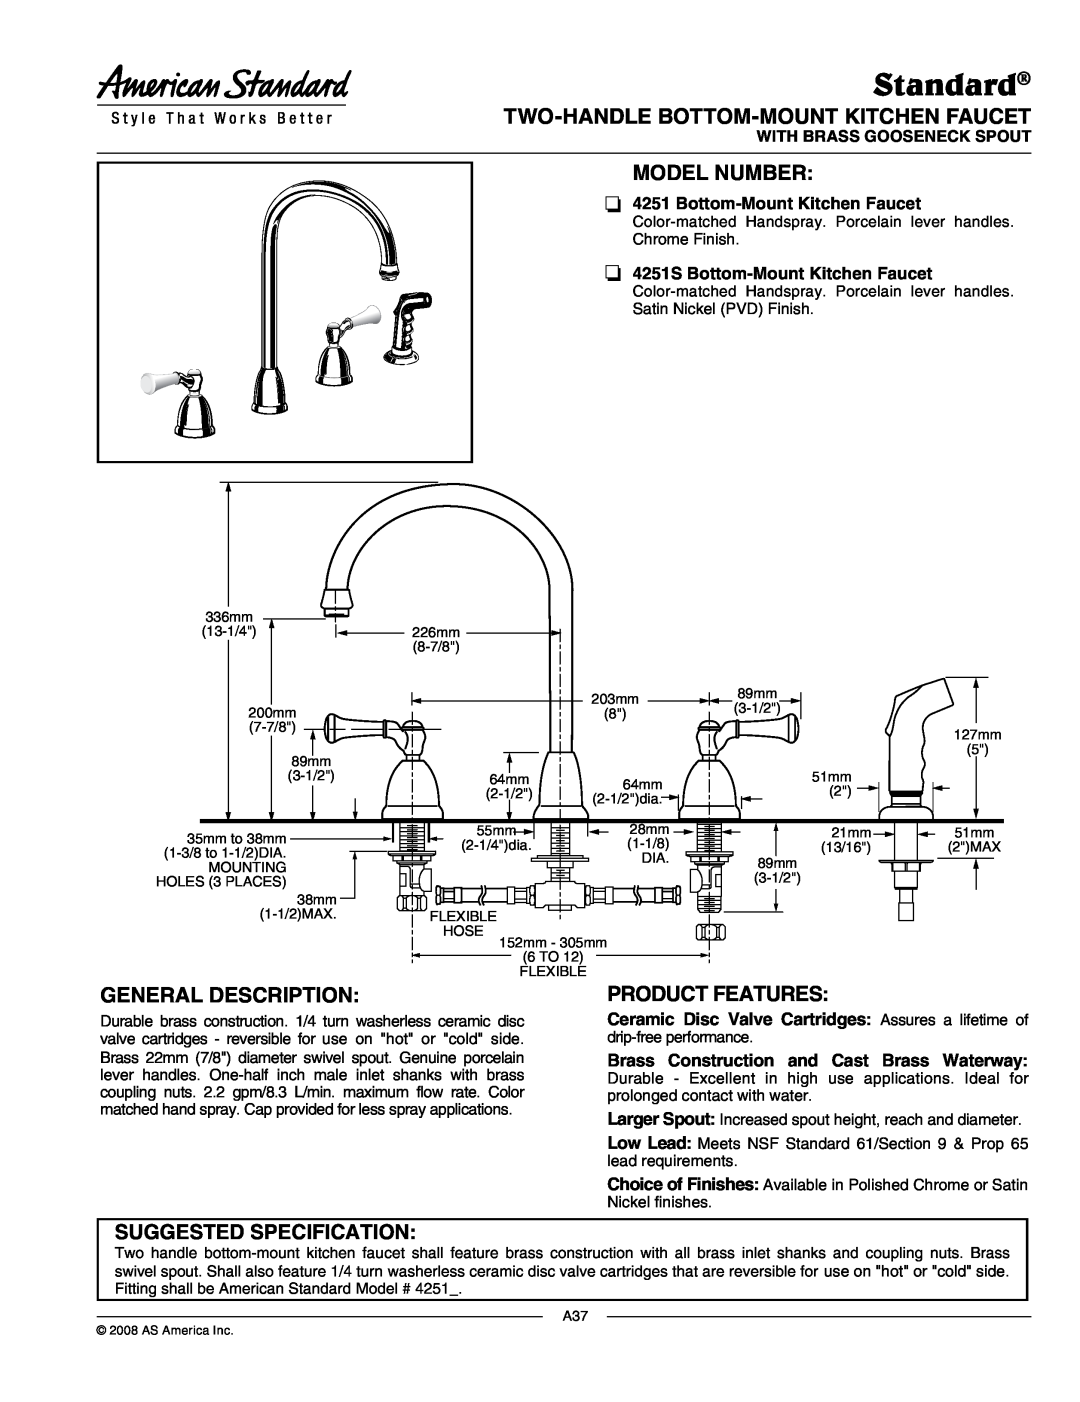 American Standard 4251S manual Standard, Suggested Specification, Bottom-MountKitchen Faucet, With Brass Gooseneck Spout 